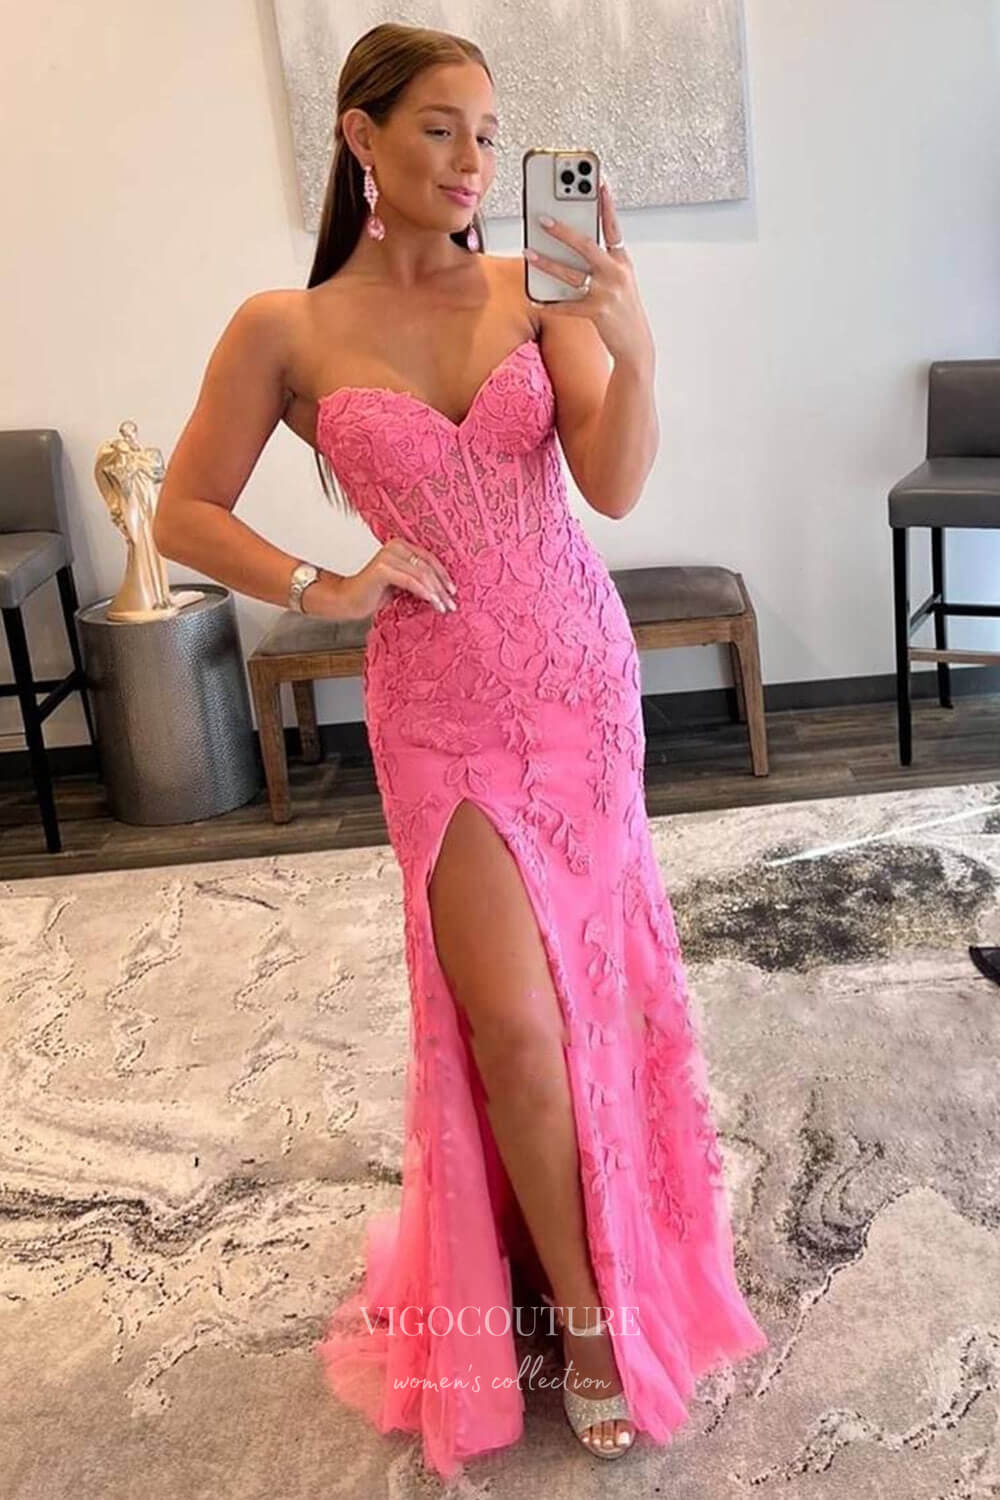 Strapless Lace Applique Prom Dresses with Slit Mermaid Sweetheart Neck Evening Dress 22170-Prom Dresses-vigocouture-Pink-US2-vigocouture